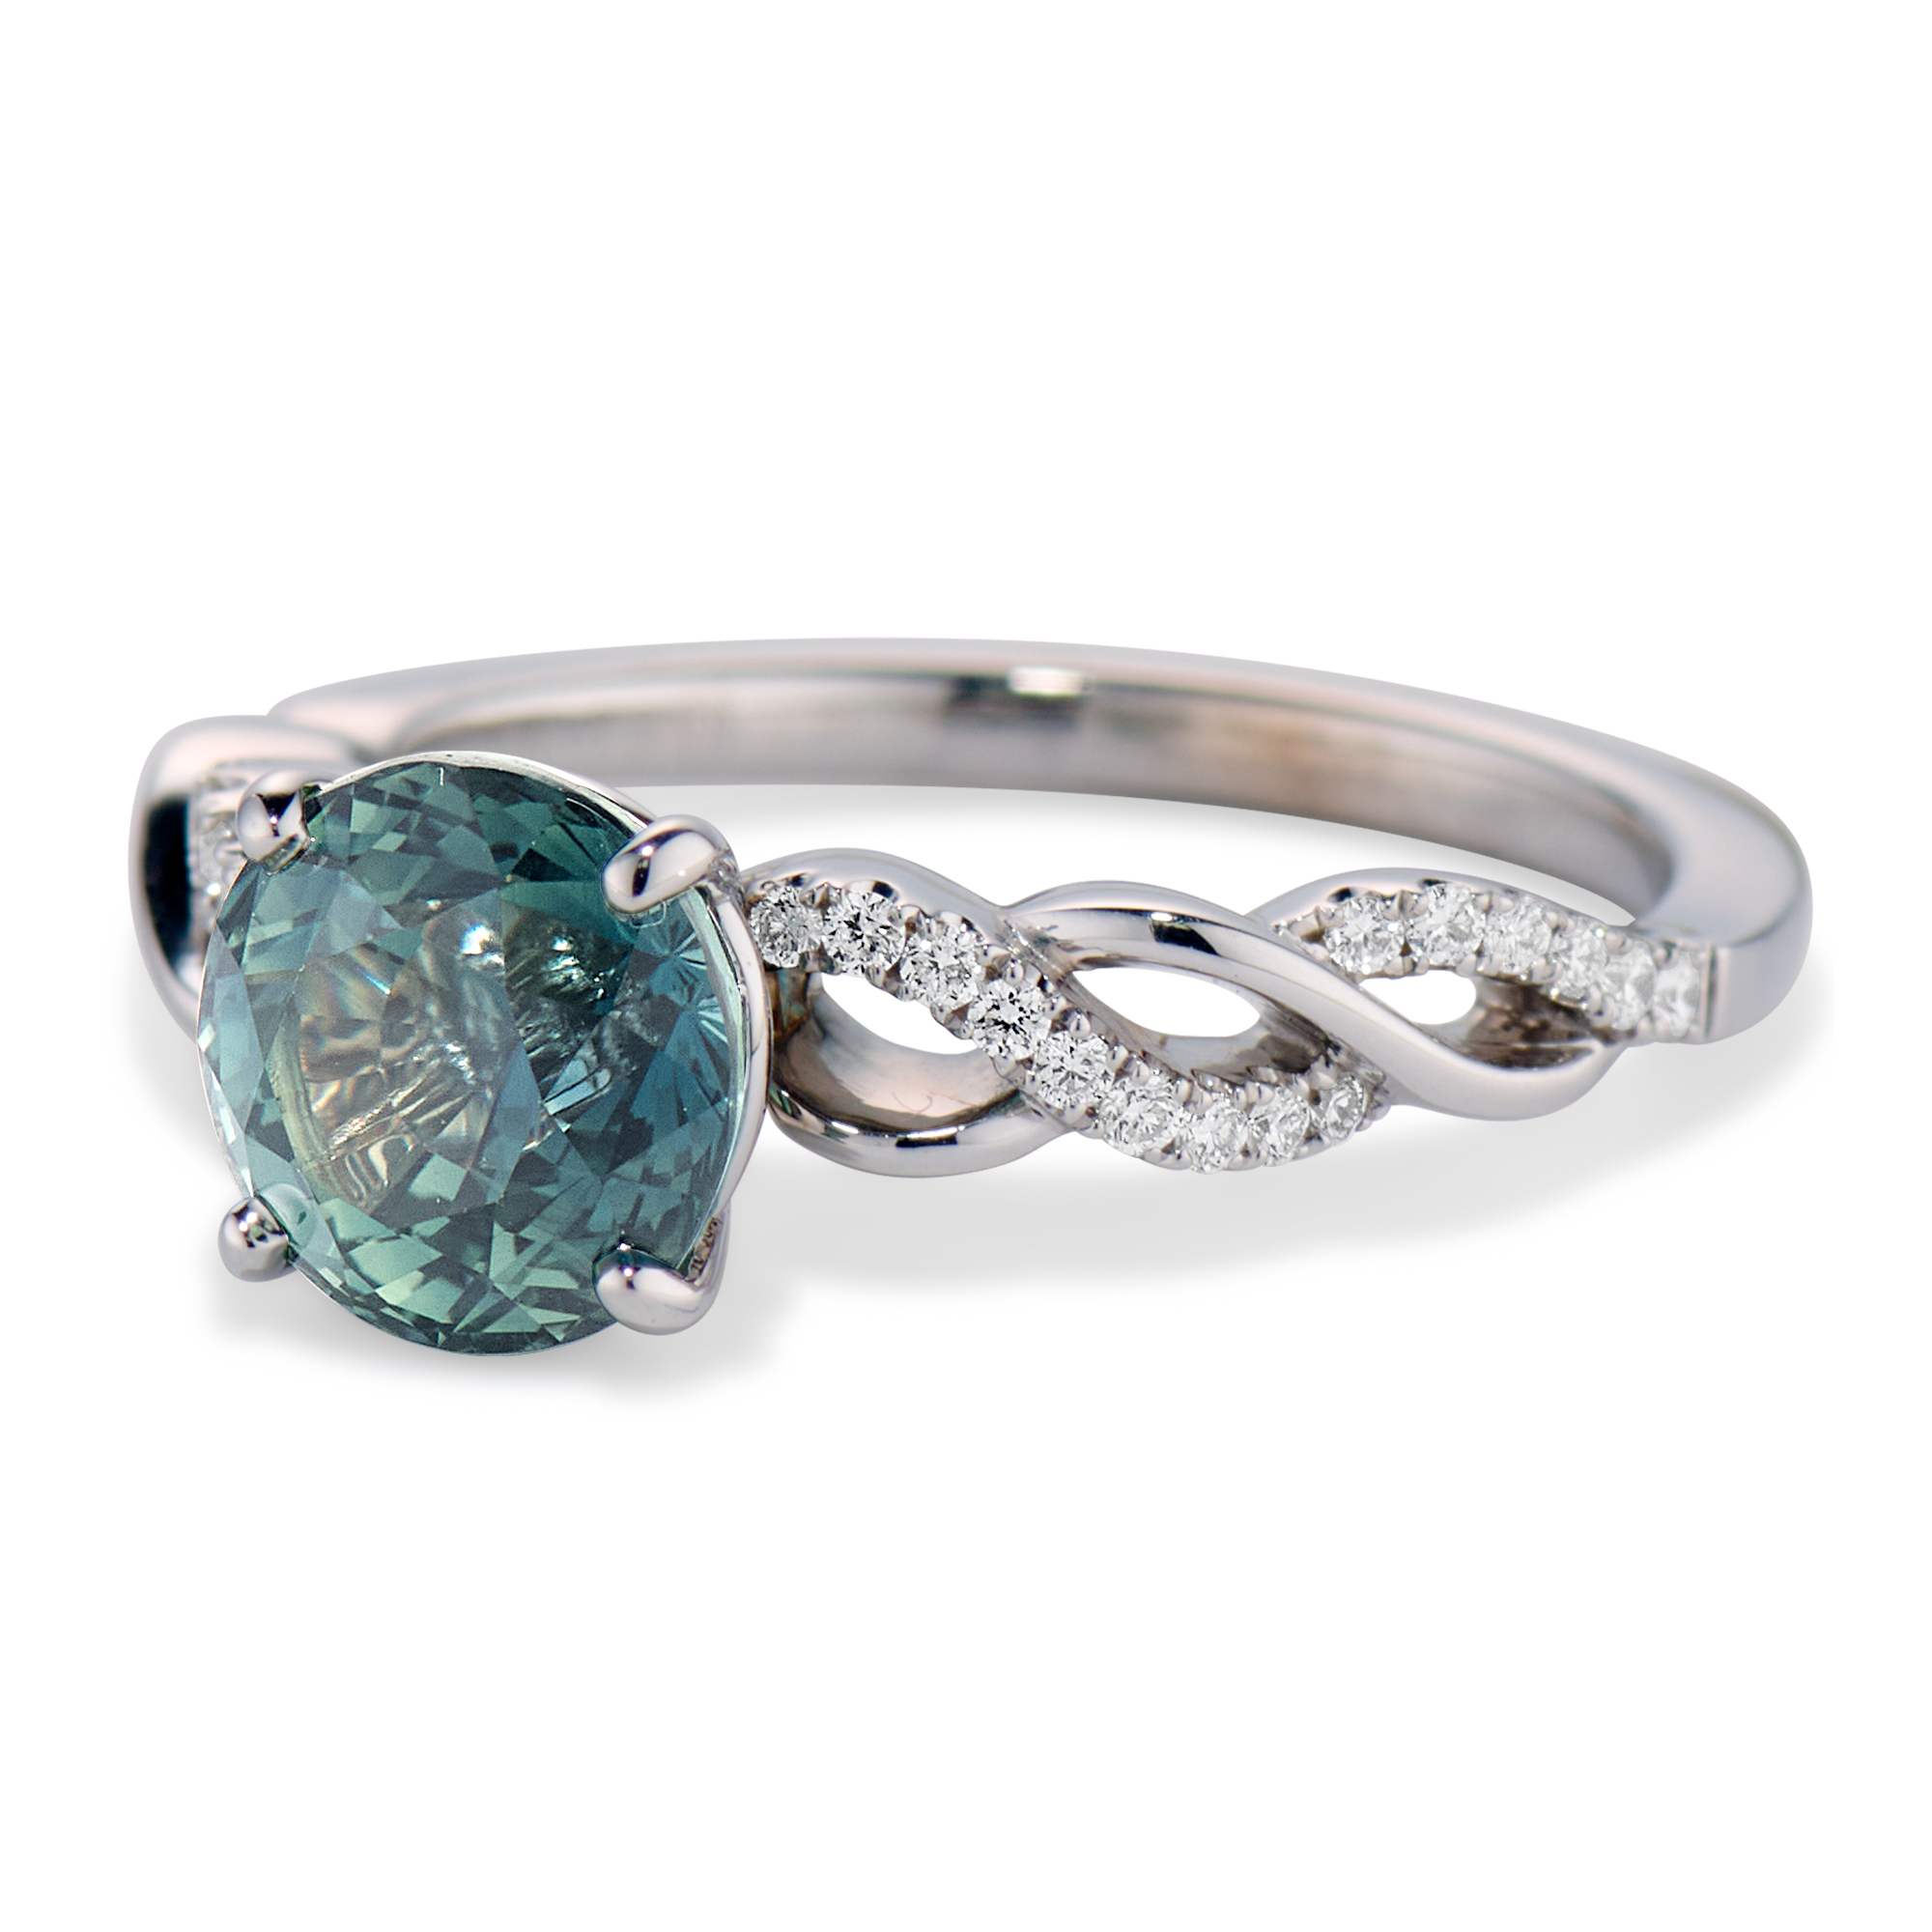 Teal Montana Sapphire and Diamond Ring - Brown Goldsmiths